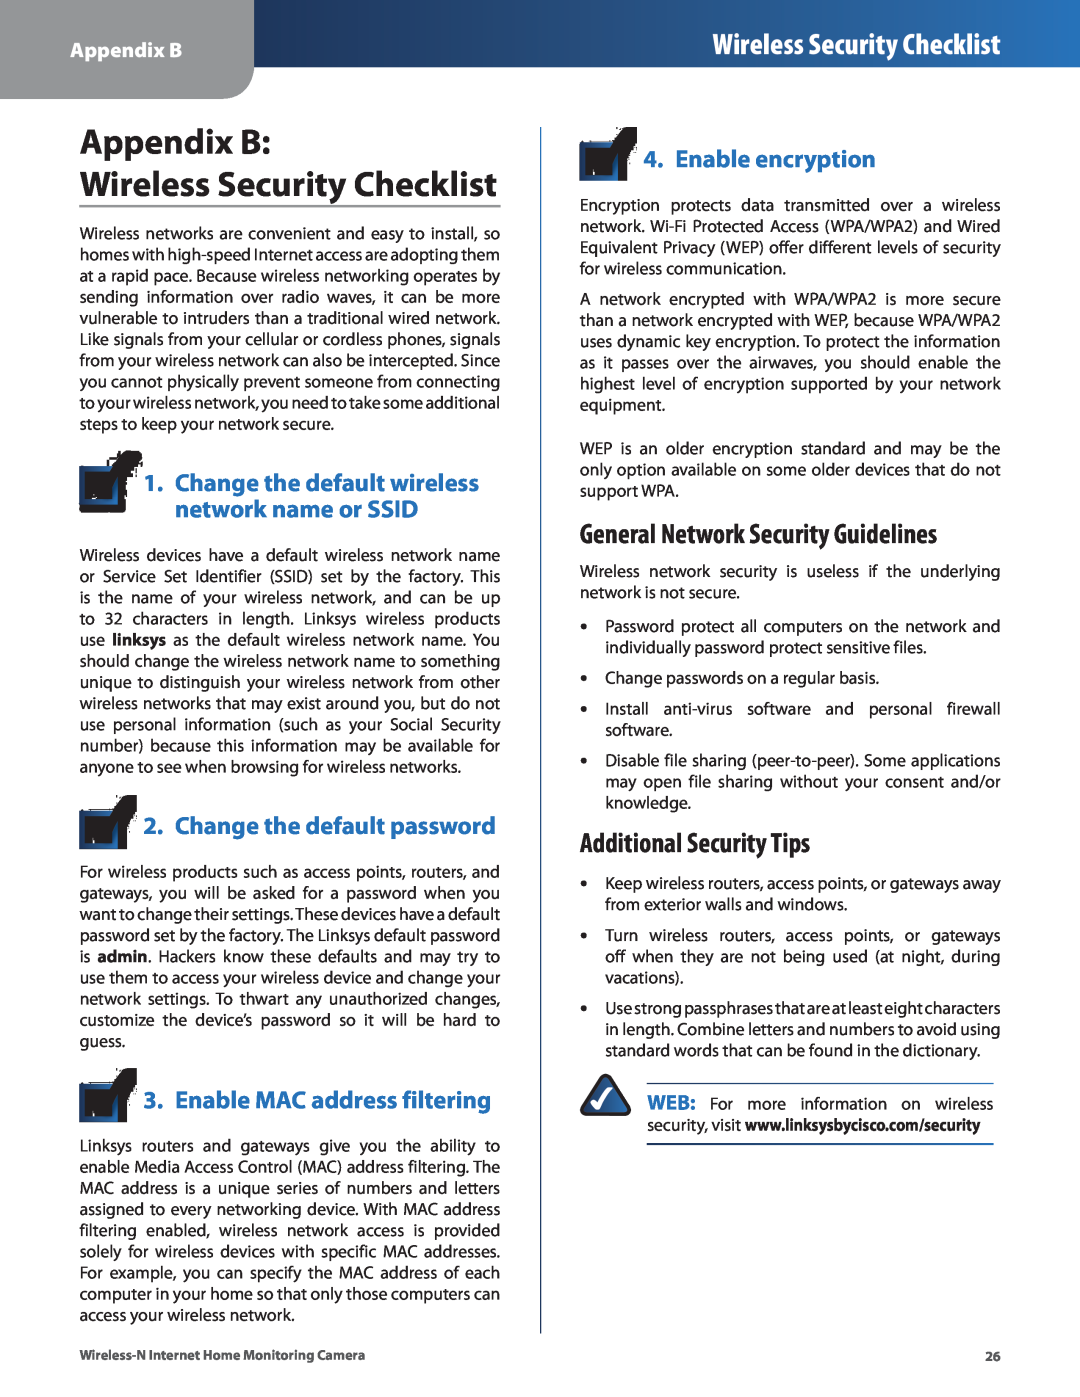 Cisco Systems WVC80N Appendix B Wireless Security Checklist, General Network Security Guidelines, Additional Security Tips 